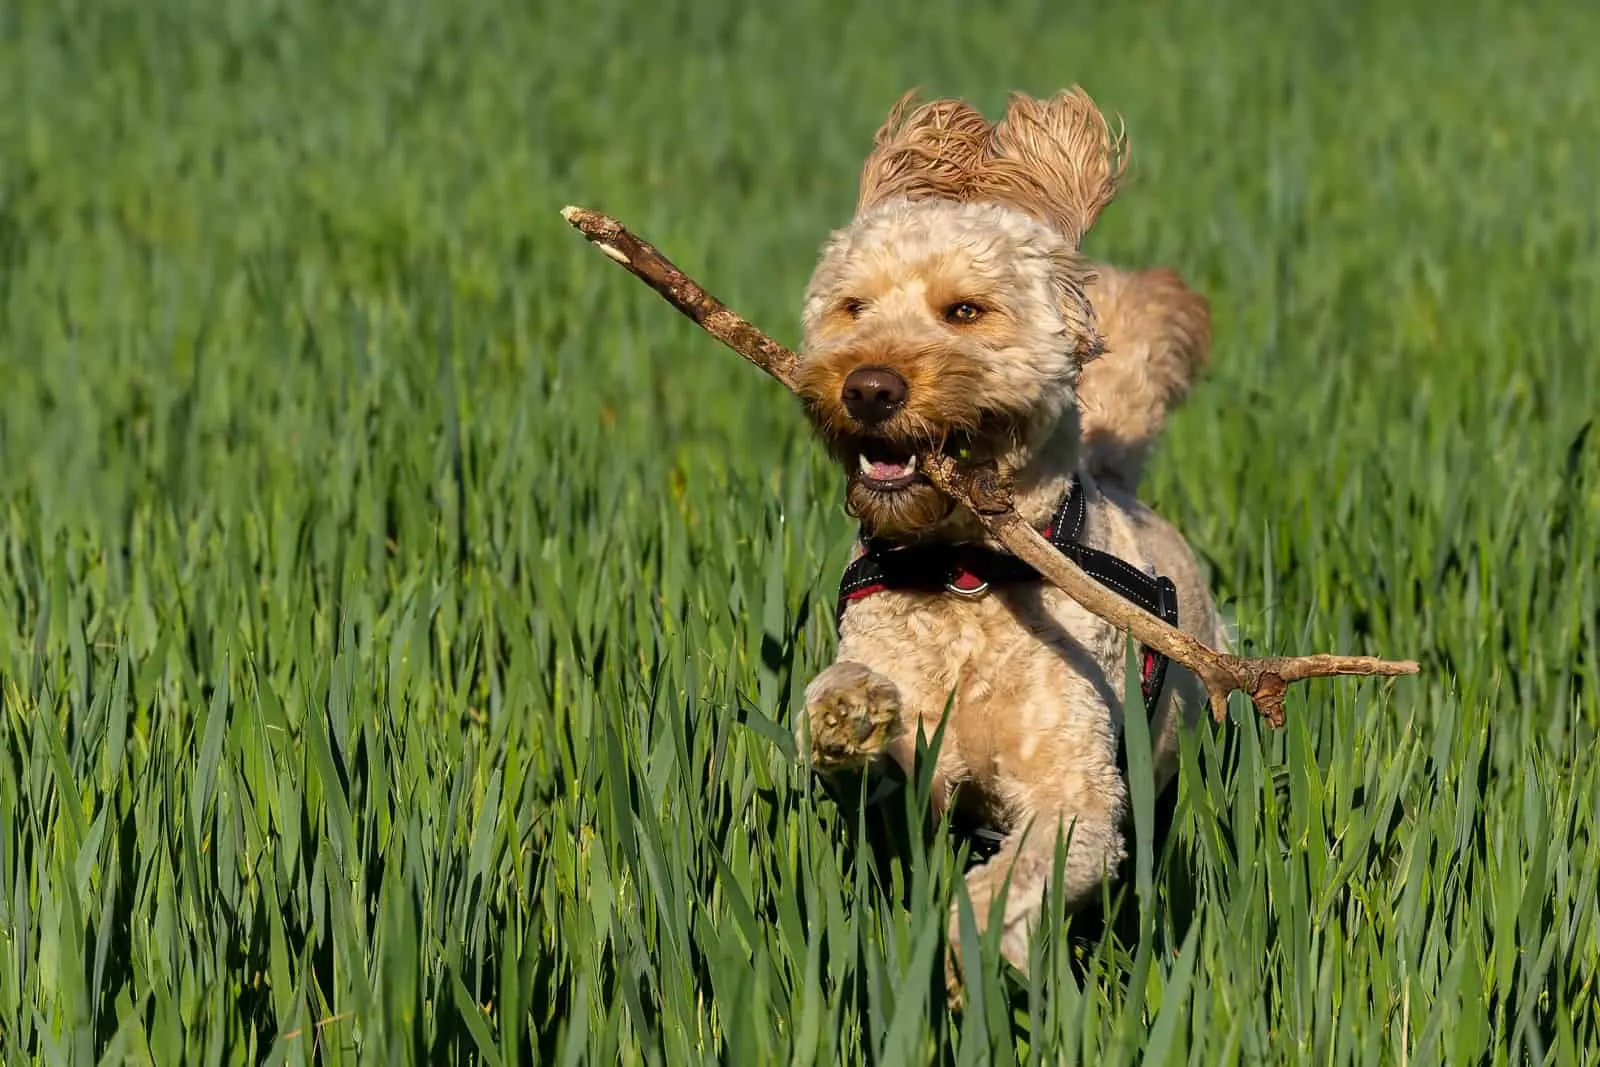 A closeup shot of the Labradoodle running in the field with wooden stick in its mouth